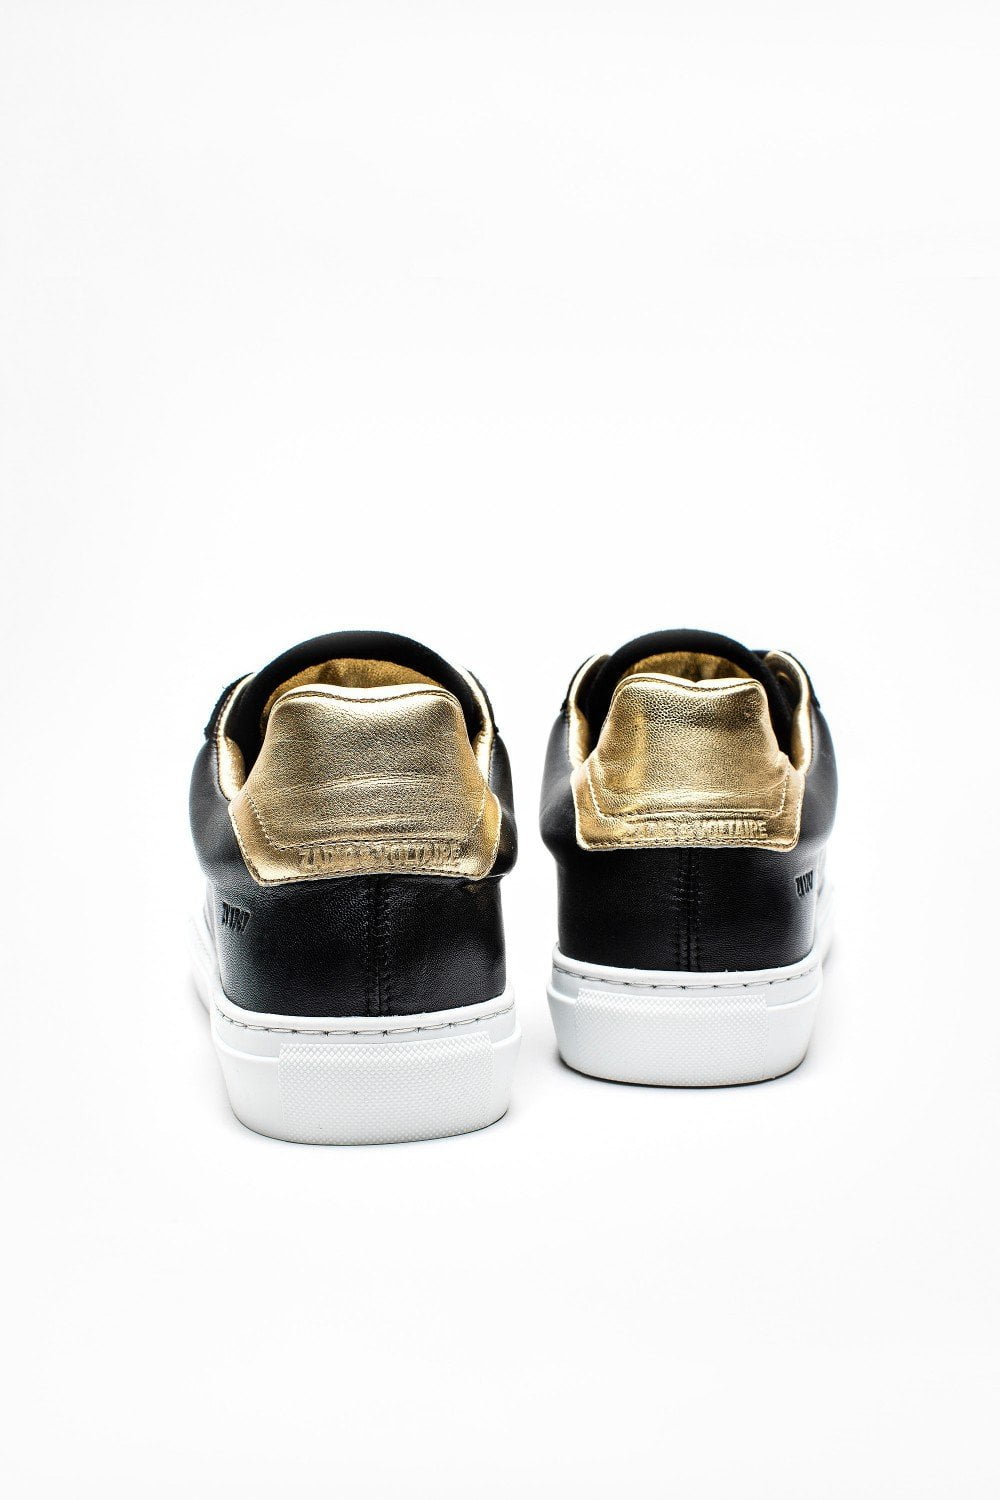 Zadig & Voltaire - ZV1747 Black Gold Leather Sneakers